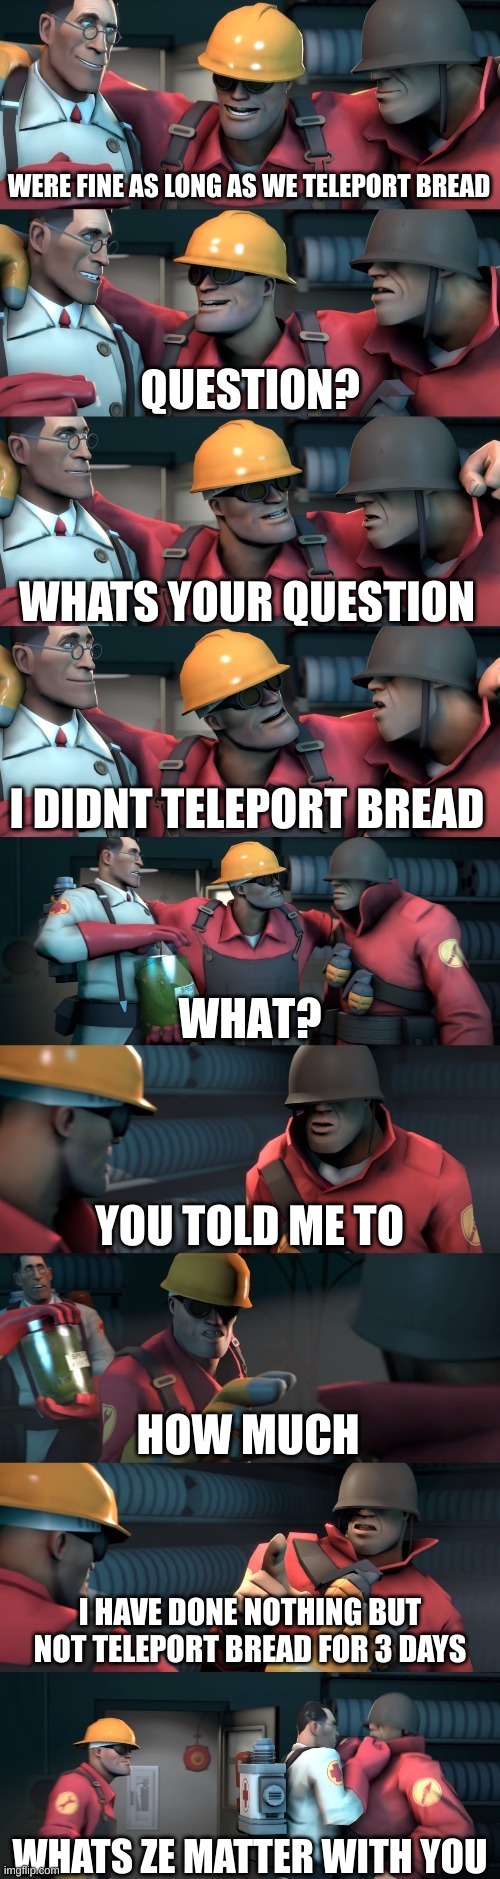 teleport bread but opposite | WERE FINE AS LONG AS WE TELEPORT BREAD; WHATS YOUR QUESTION; I DIDNT TELEPORT BREAD; YOU TOLD ME TO; HOW MUCH; I HAVE DONE NOTHING BUT NOT TELEPORT BREAD FOR 3 DAYS; WHATS ZE MATTER WITH YOU | image tagged in tf2 teleport bread meme english | made w/ Imgflip meme maker